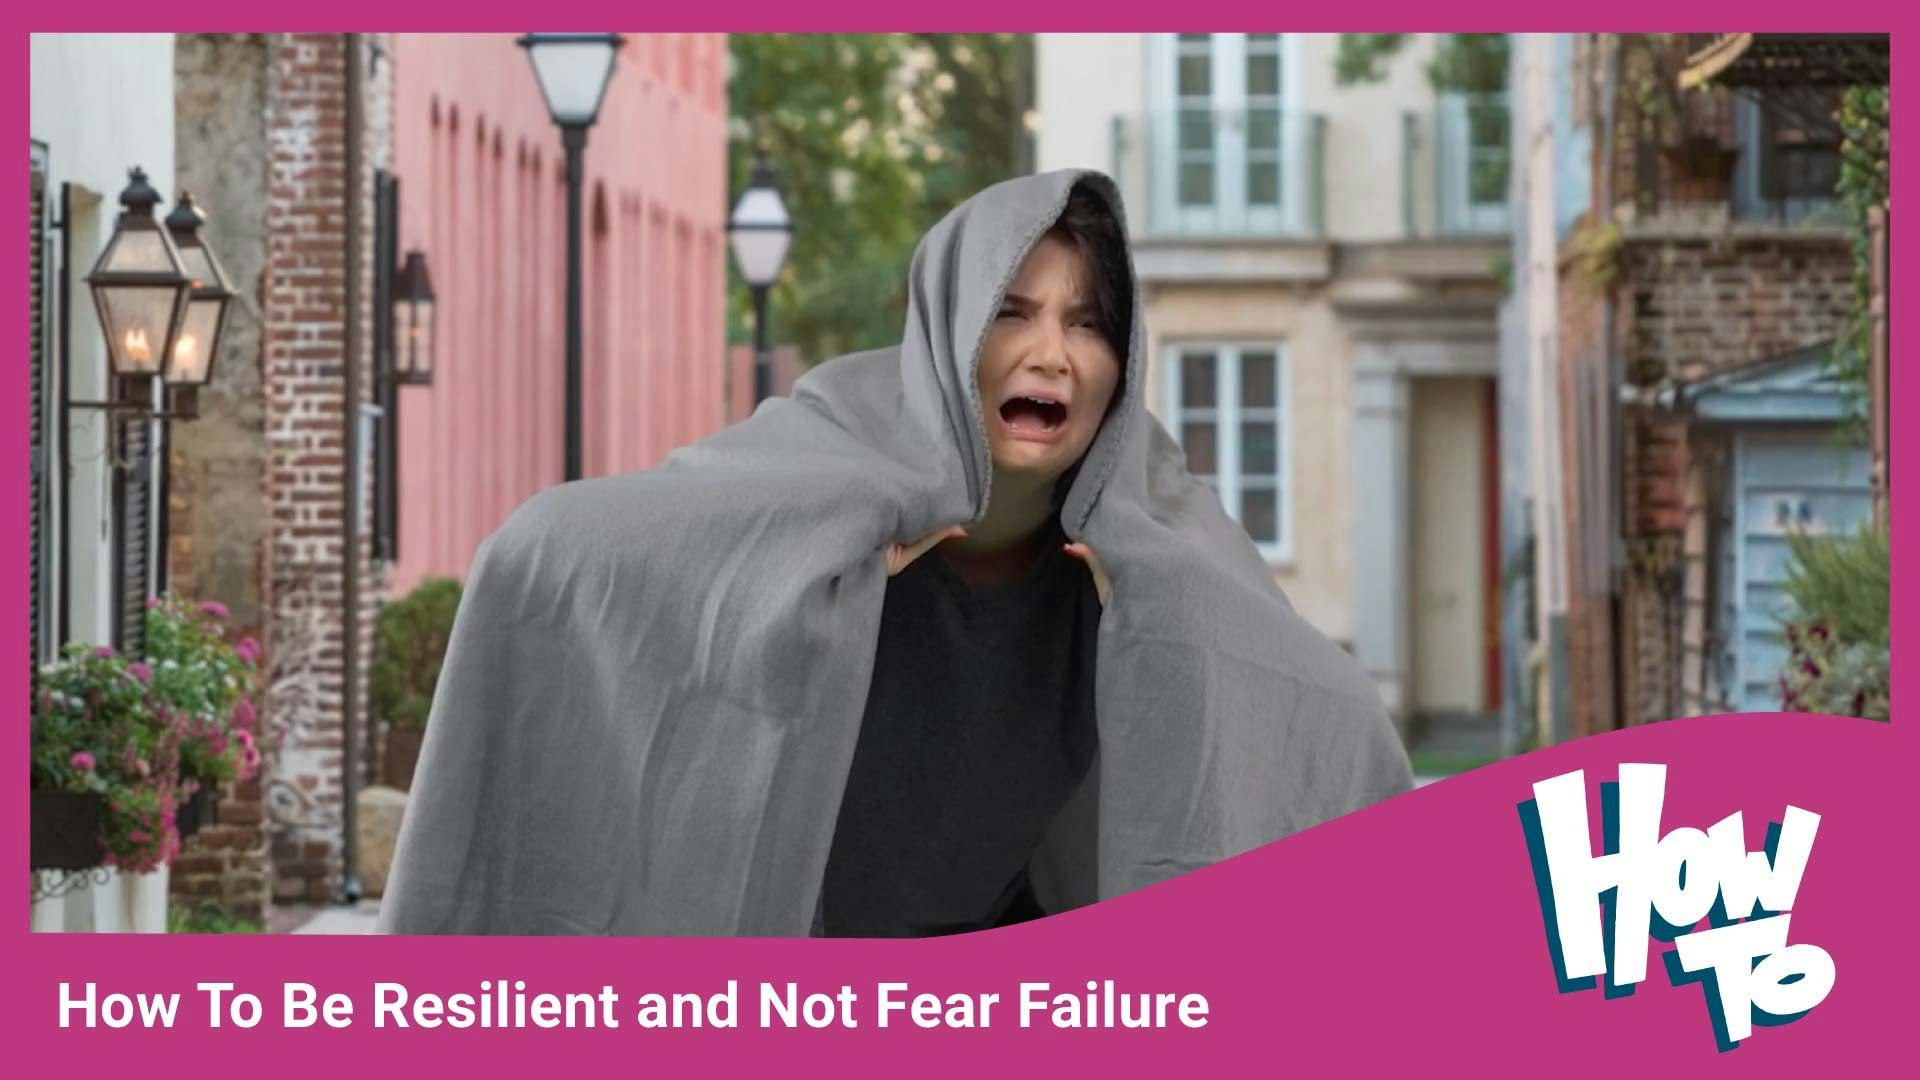 How To Be Resilient and Not Fear Failure